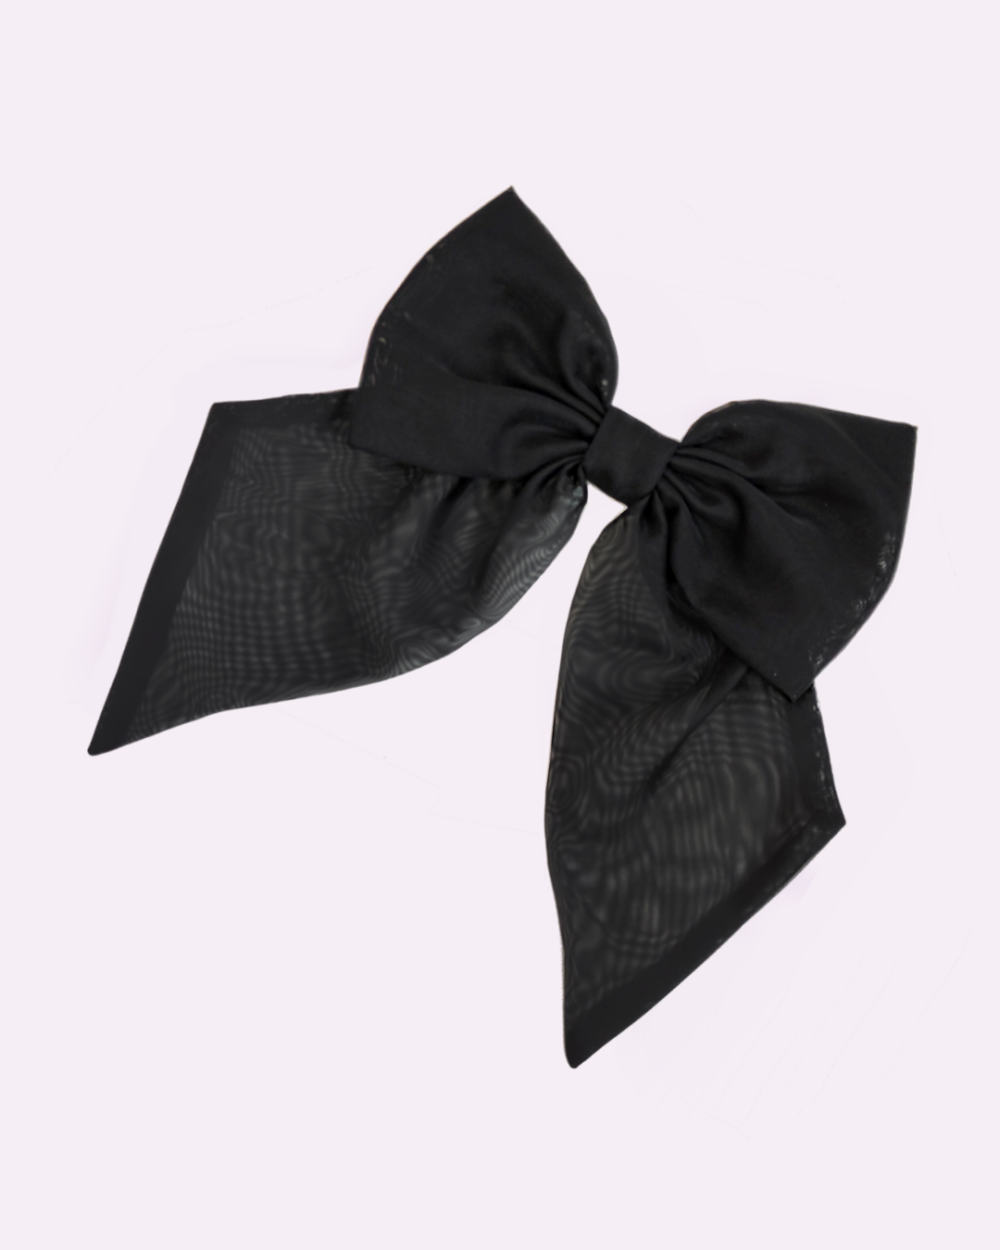 Black brooch in the shape of a giant bow made of voile by melikestea.